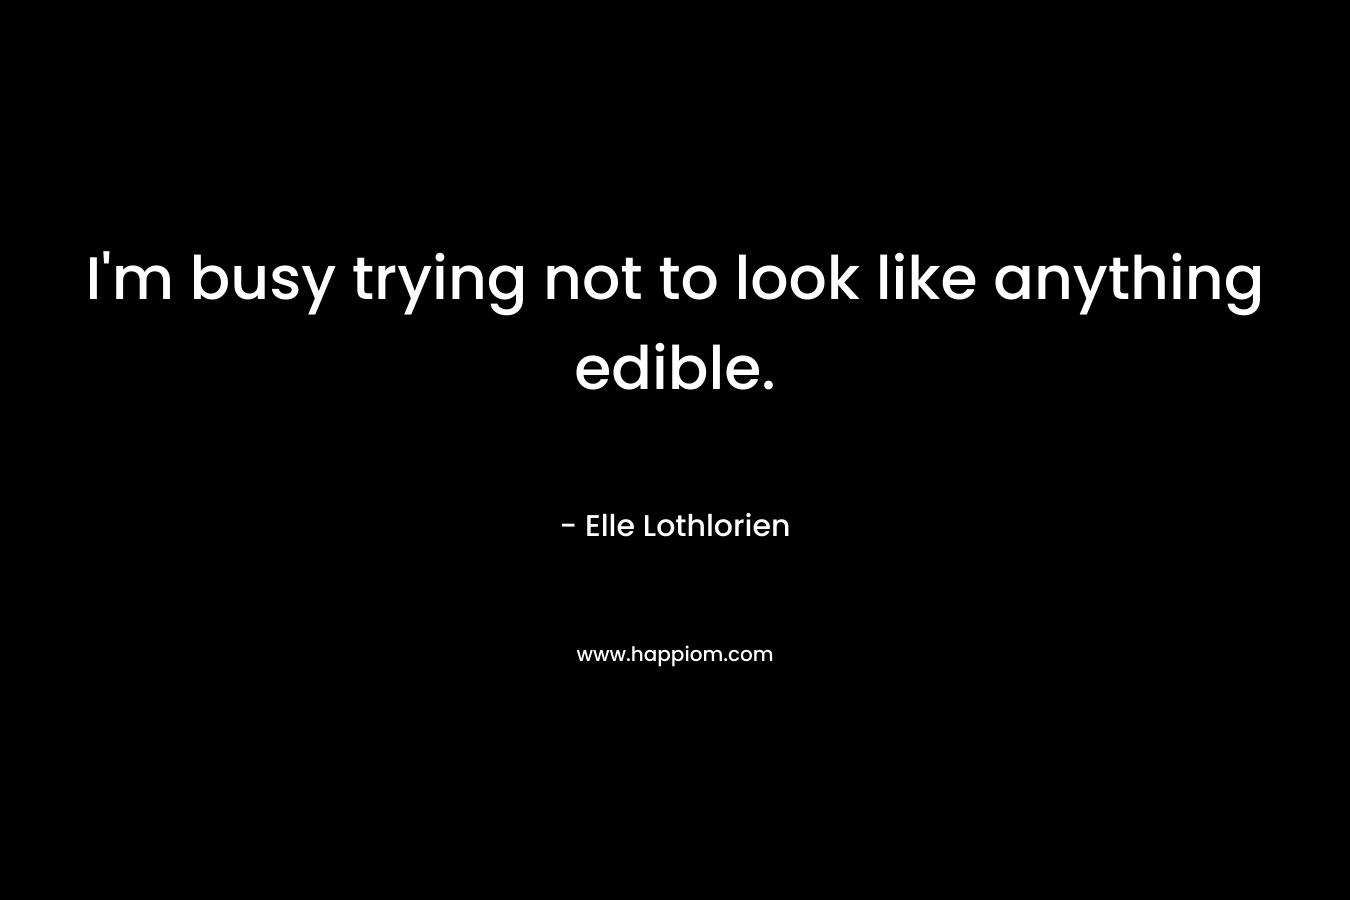 I’m busy trying not to look like anything edible. – Elle Lothlorien